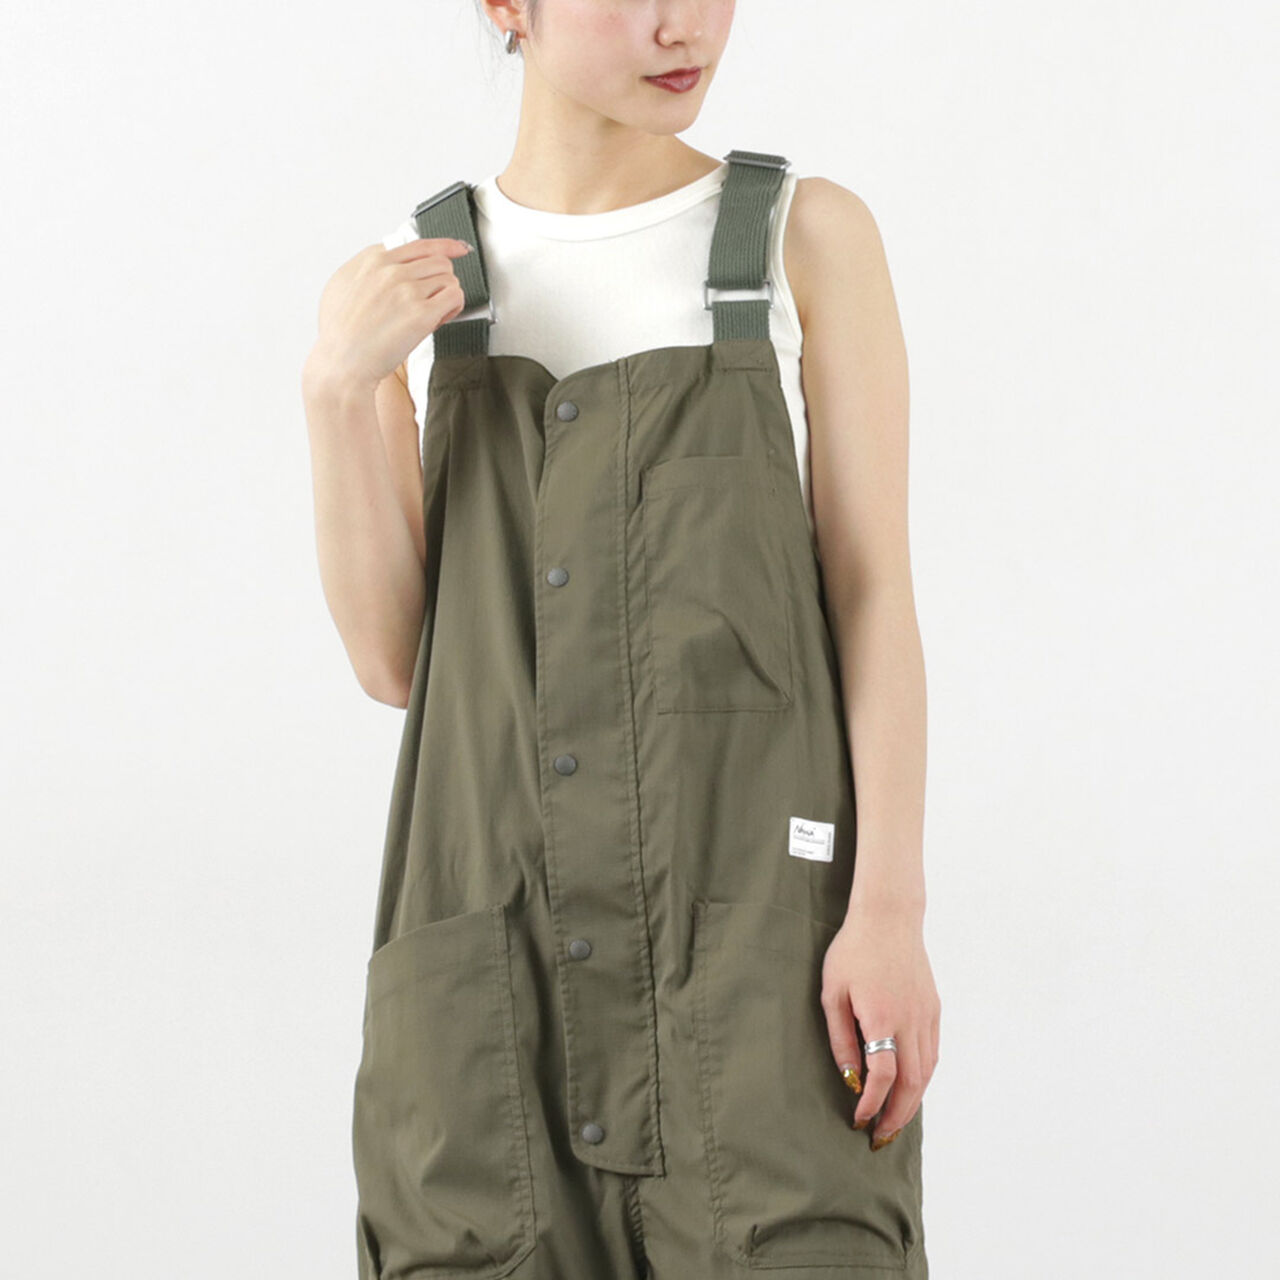 HINOC RIPSTOP FIELD OVERALLS,ArmyGreen, large image number 0